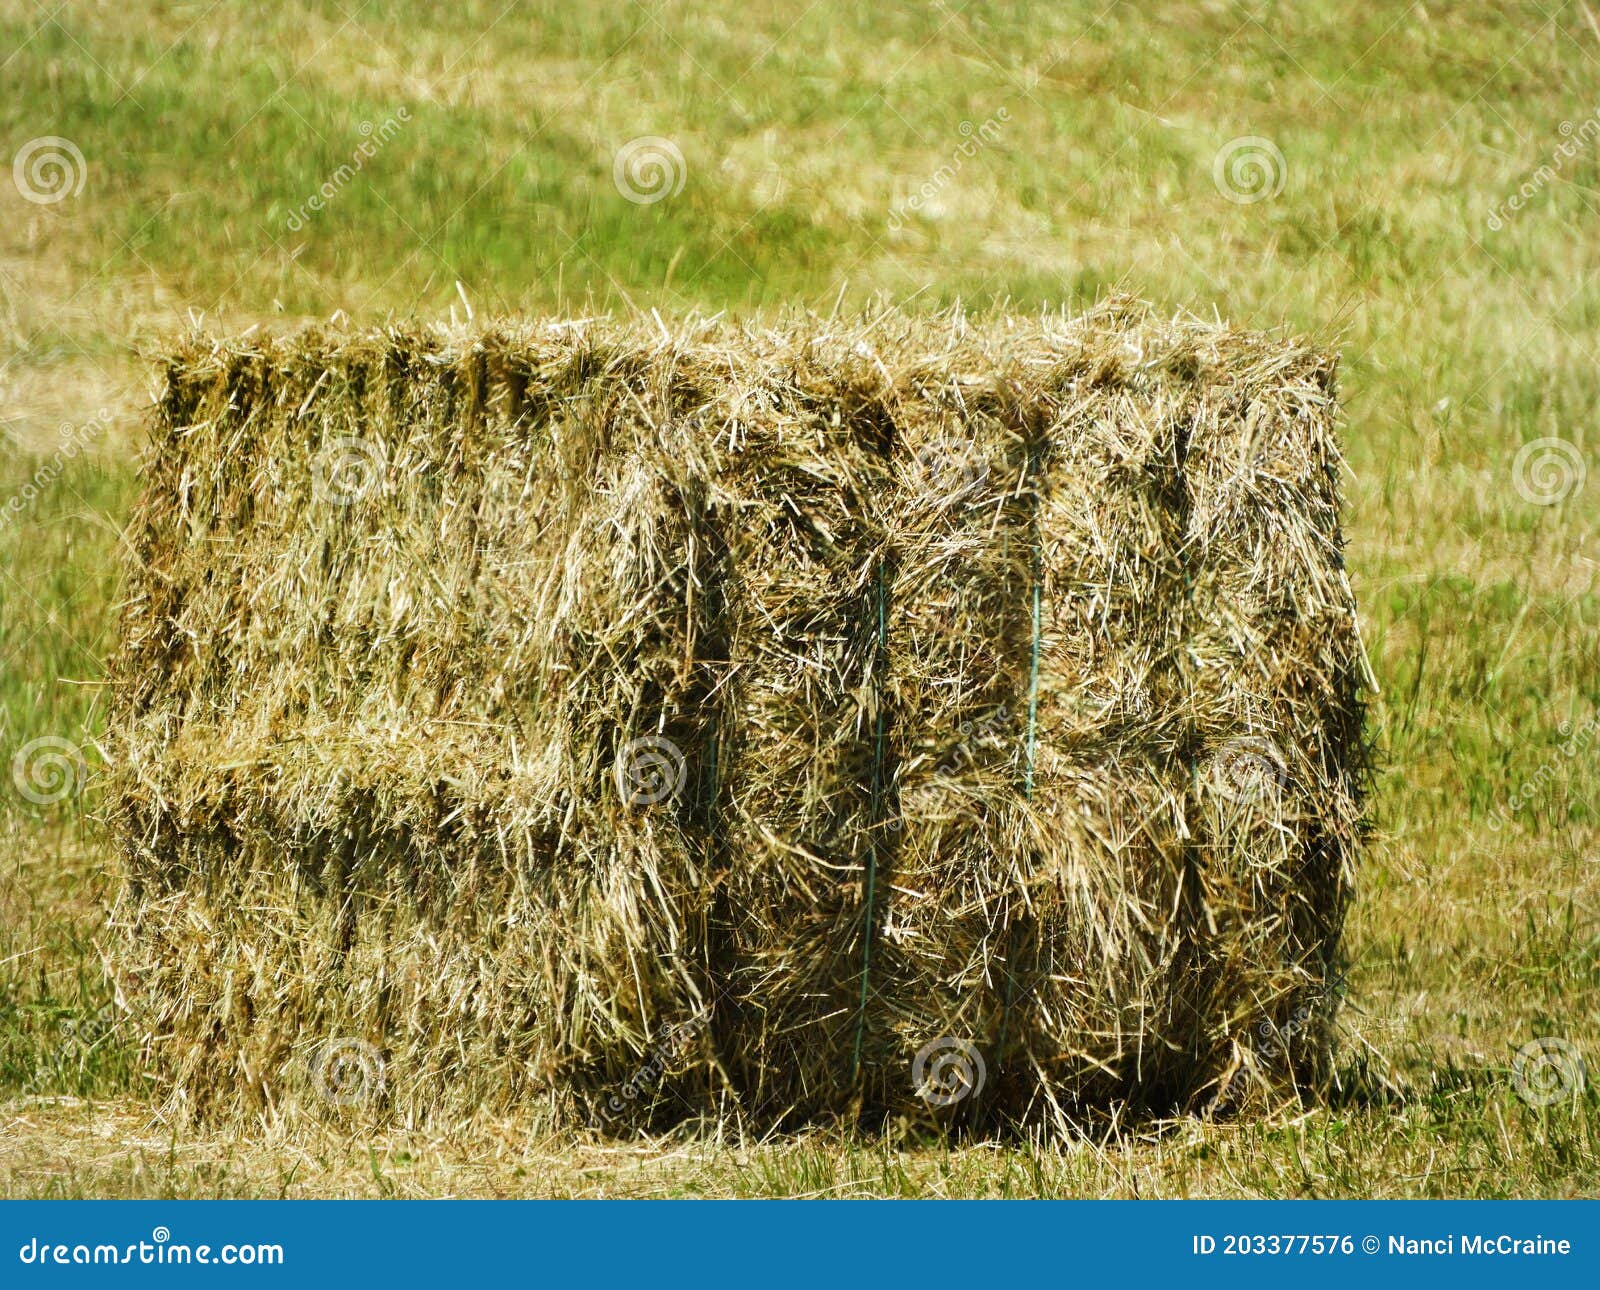 Square Haybale Harvested and Ready for Farm Pick Up Stock Photo - Image ...